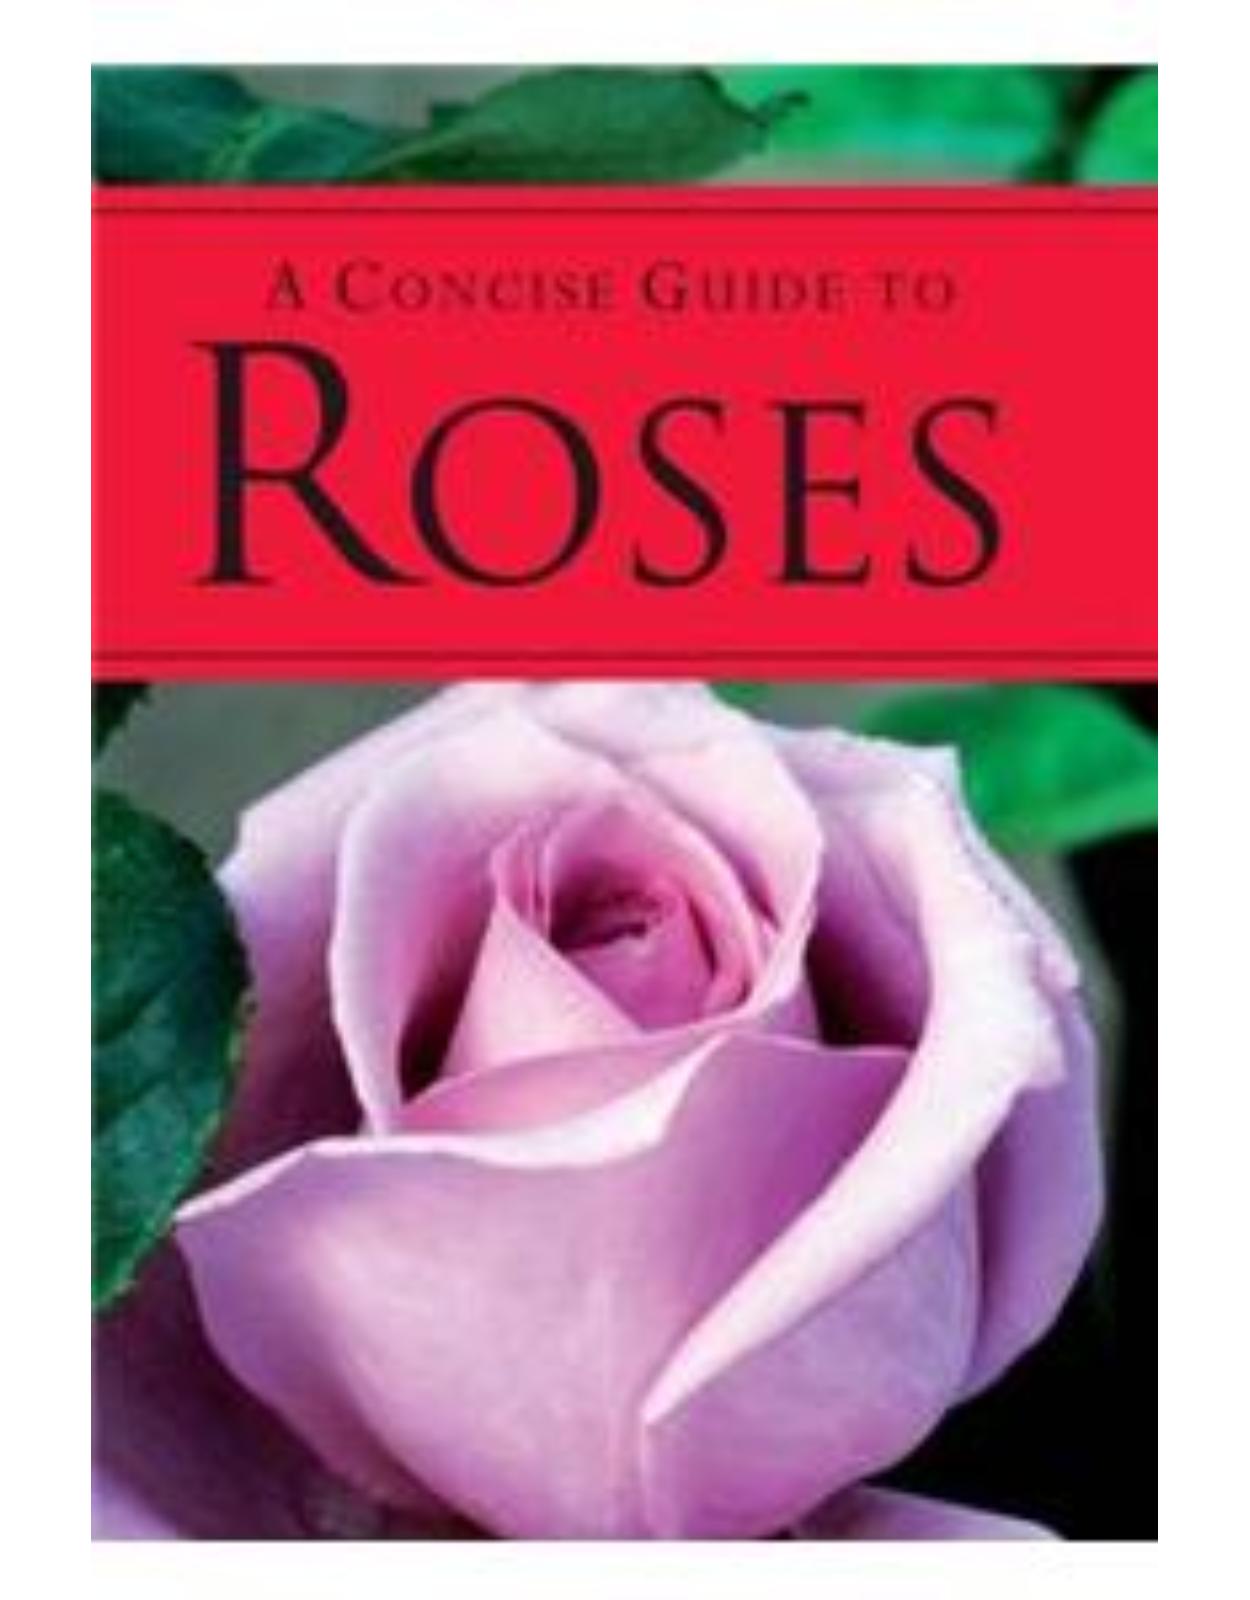 Concise Guide to Roses